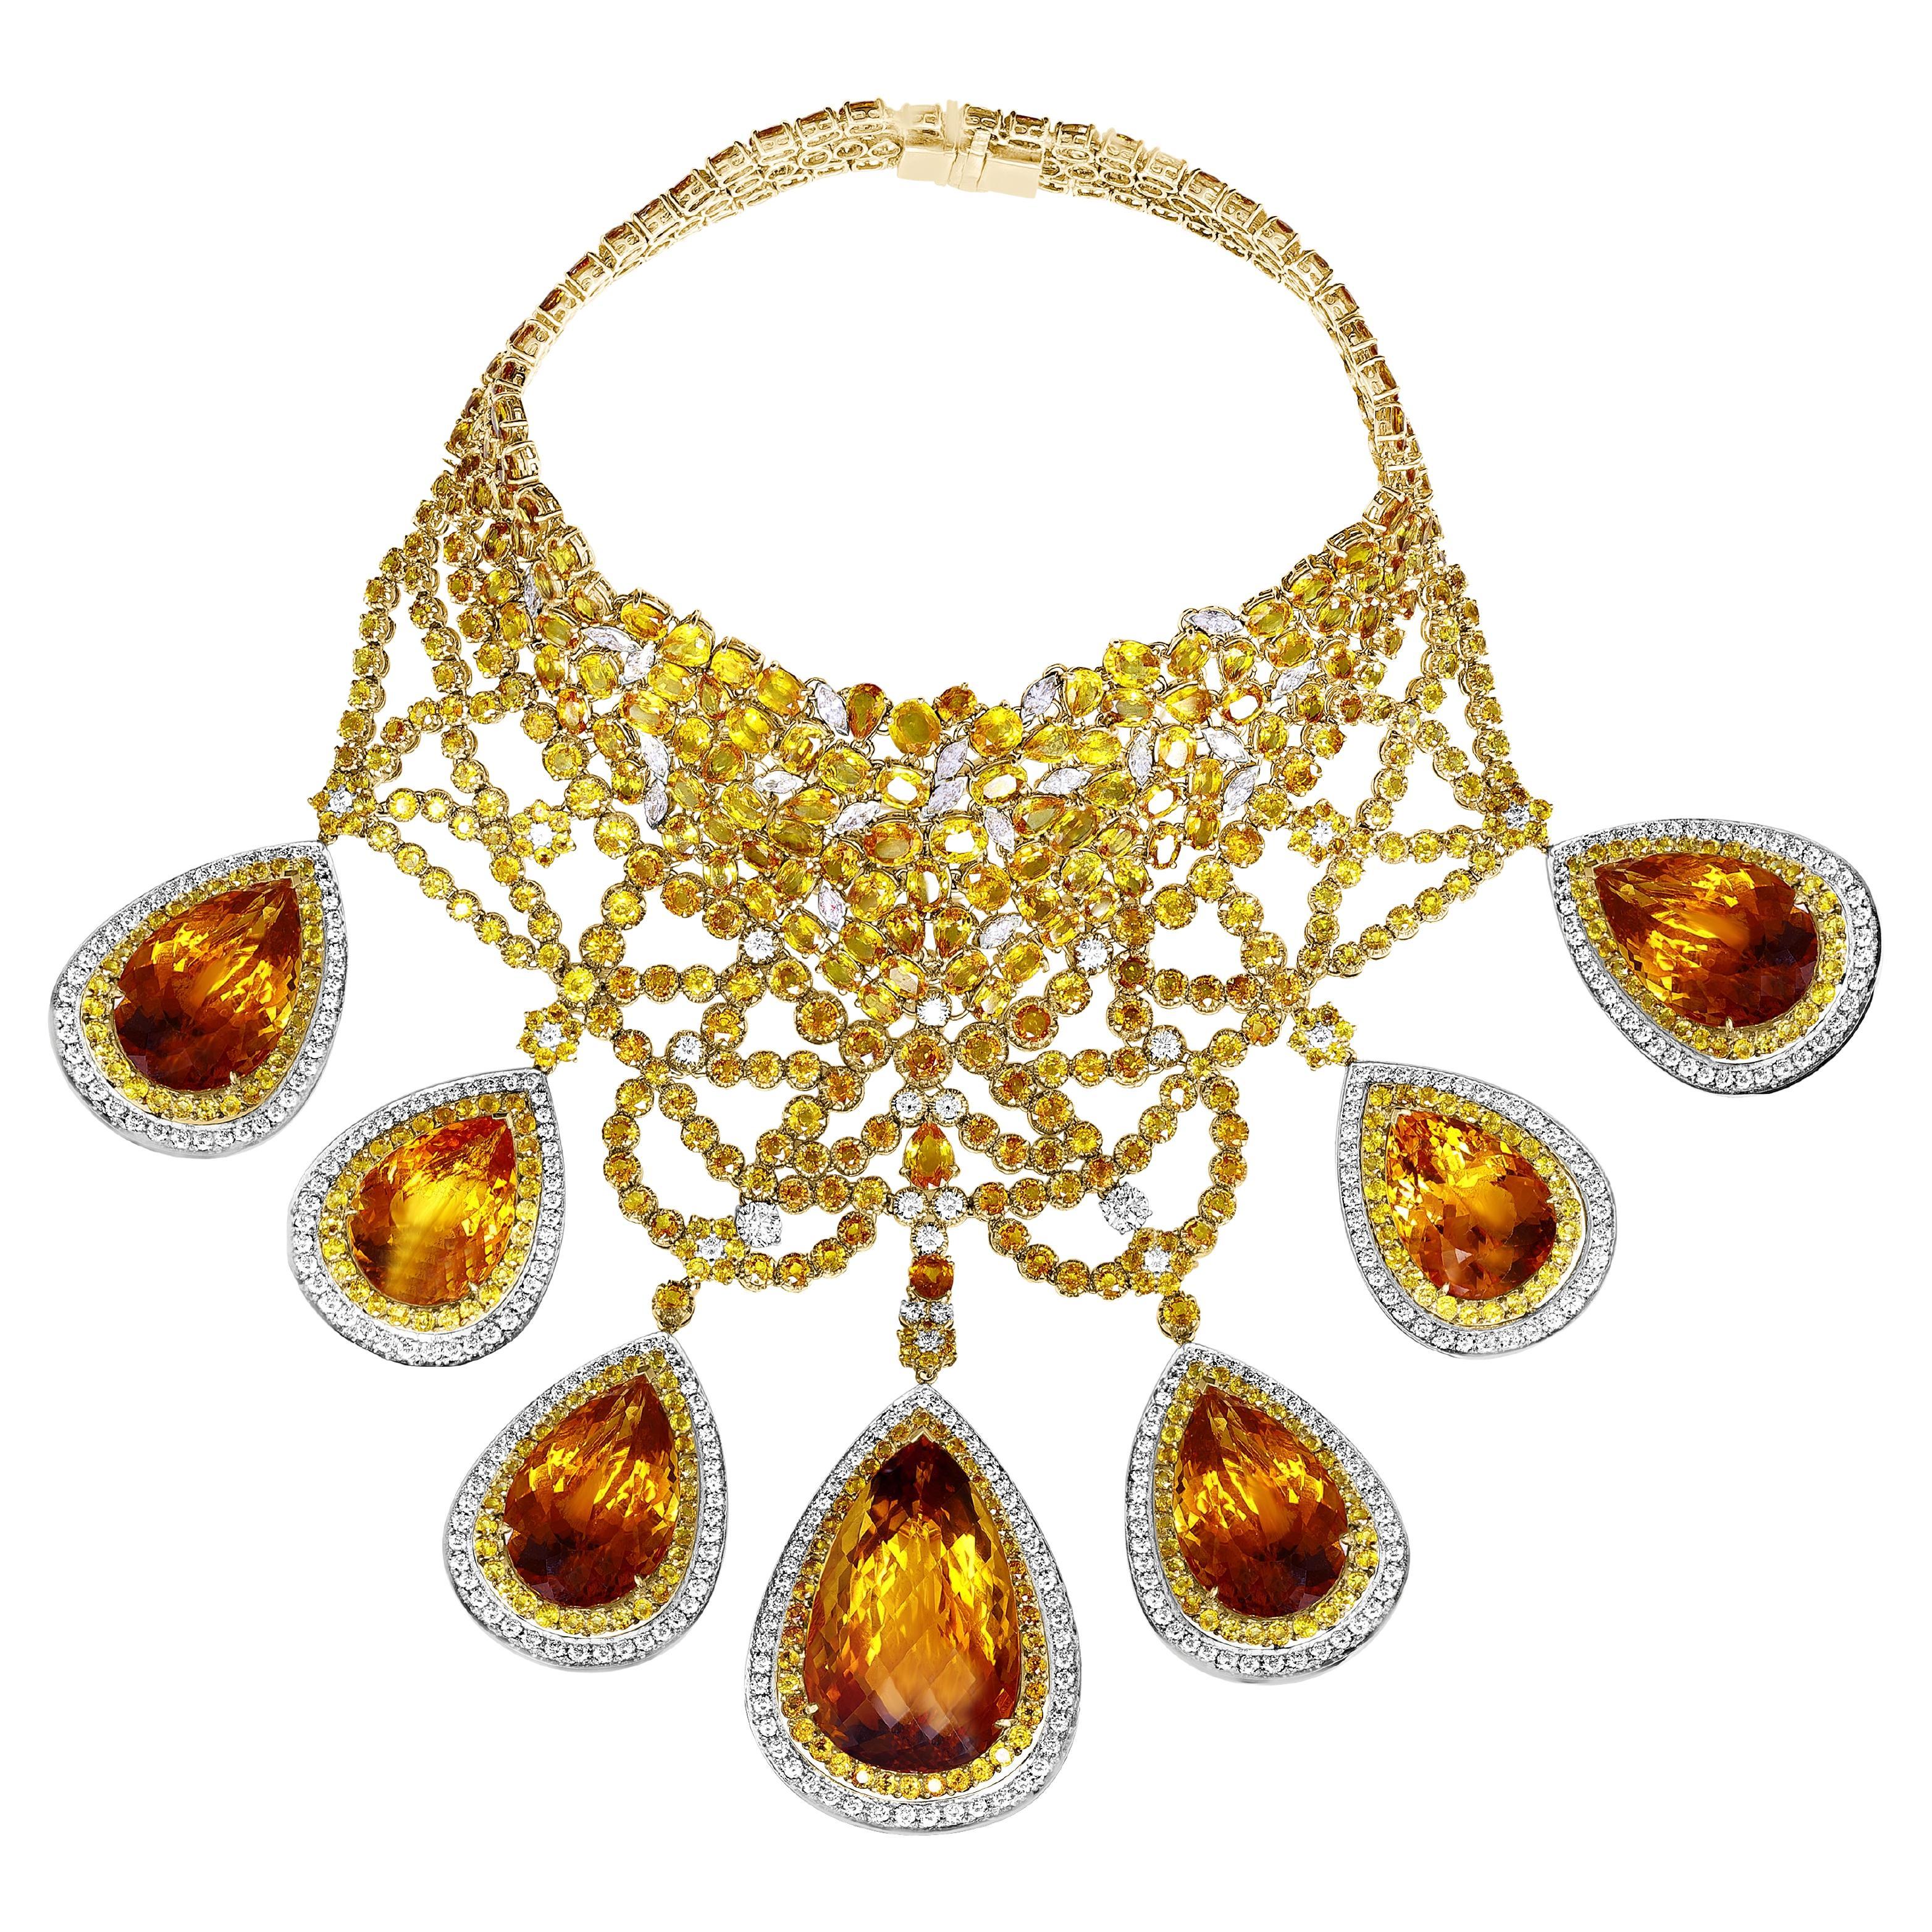 
Vintage Suite , Necklace and Earring
700 Ct Citrine ,450 Ct YS & 35 Ct Diamond Necklace + ER Suite 18 Kt  Gold 487 Gm
Out of this world suite 
Royal Set 
Total 7 Drops of  Pear shape citrine approximately 700 ct , 5 drops in the necklace and two